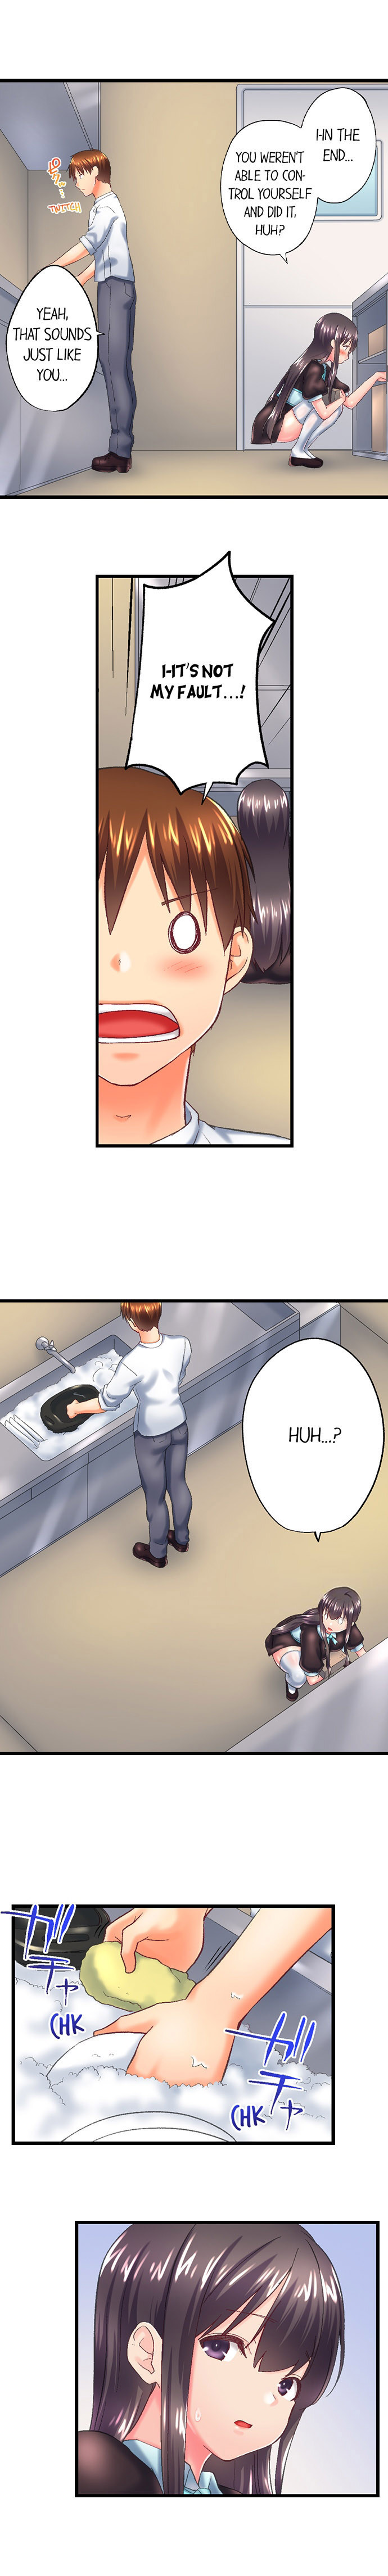 My Brother’s Slipped Inside Me in The Bathtub - Chapter 112 Page 3